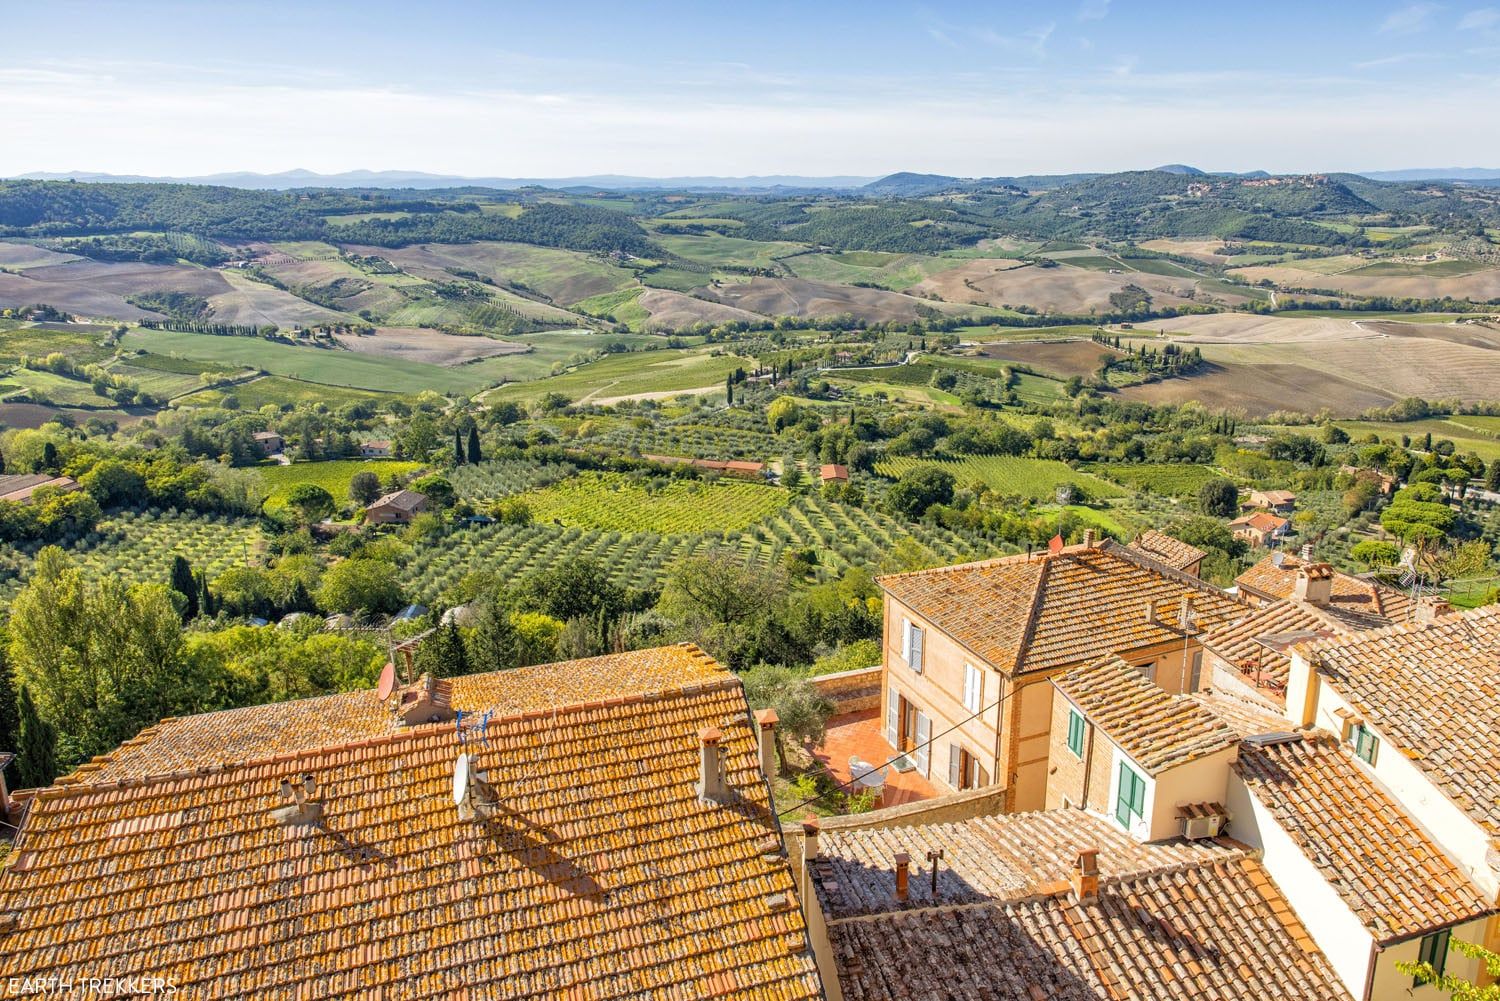 View from Montepulciano